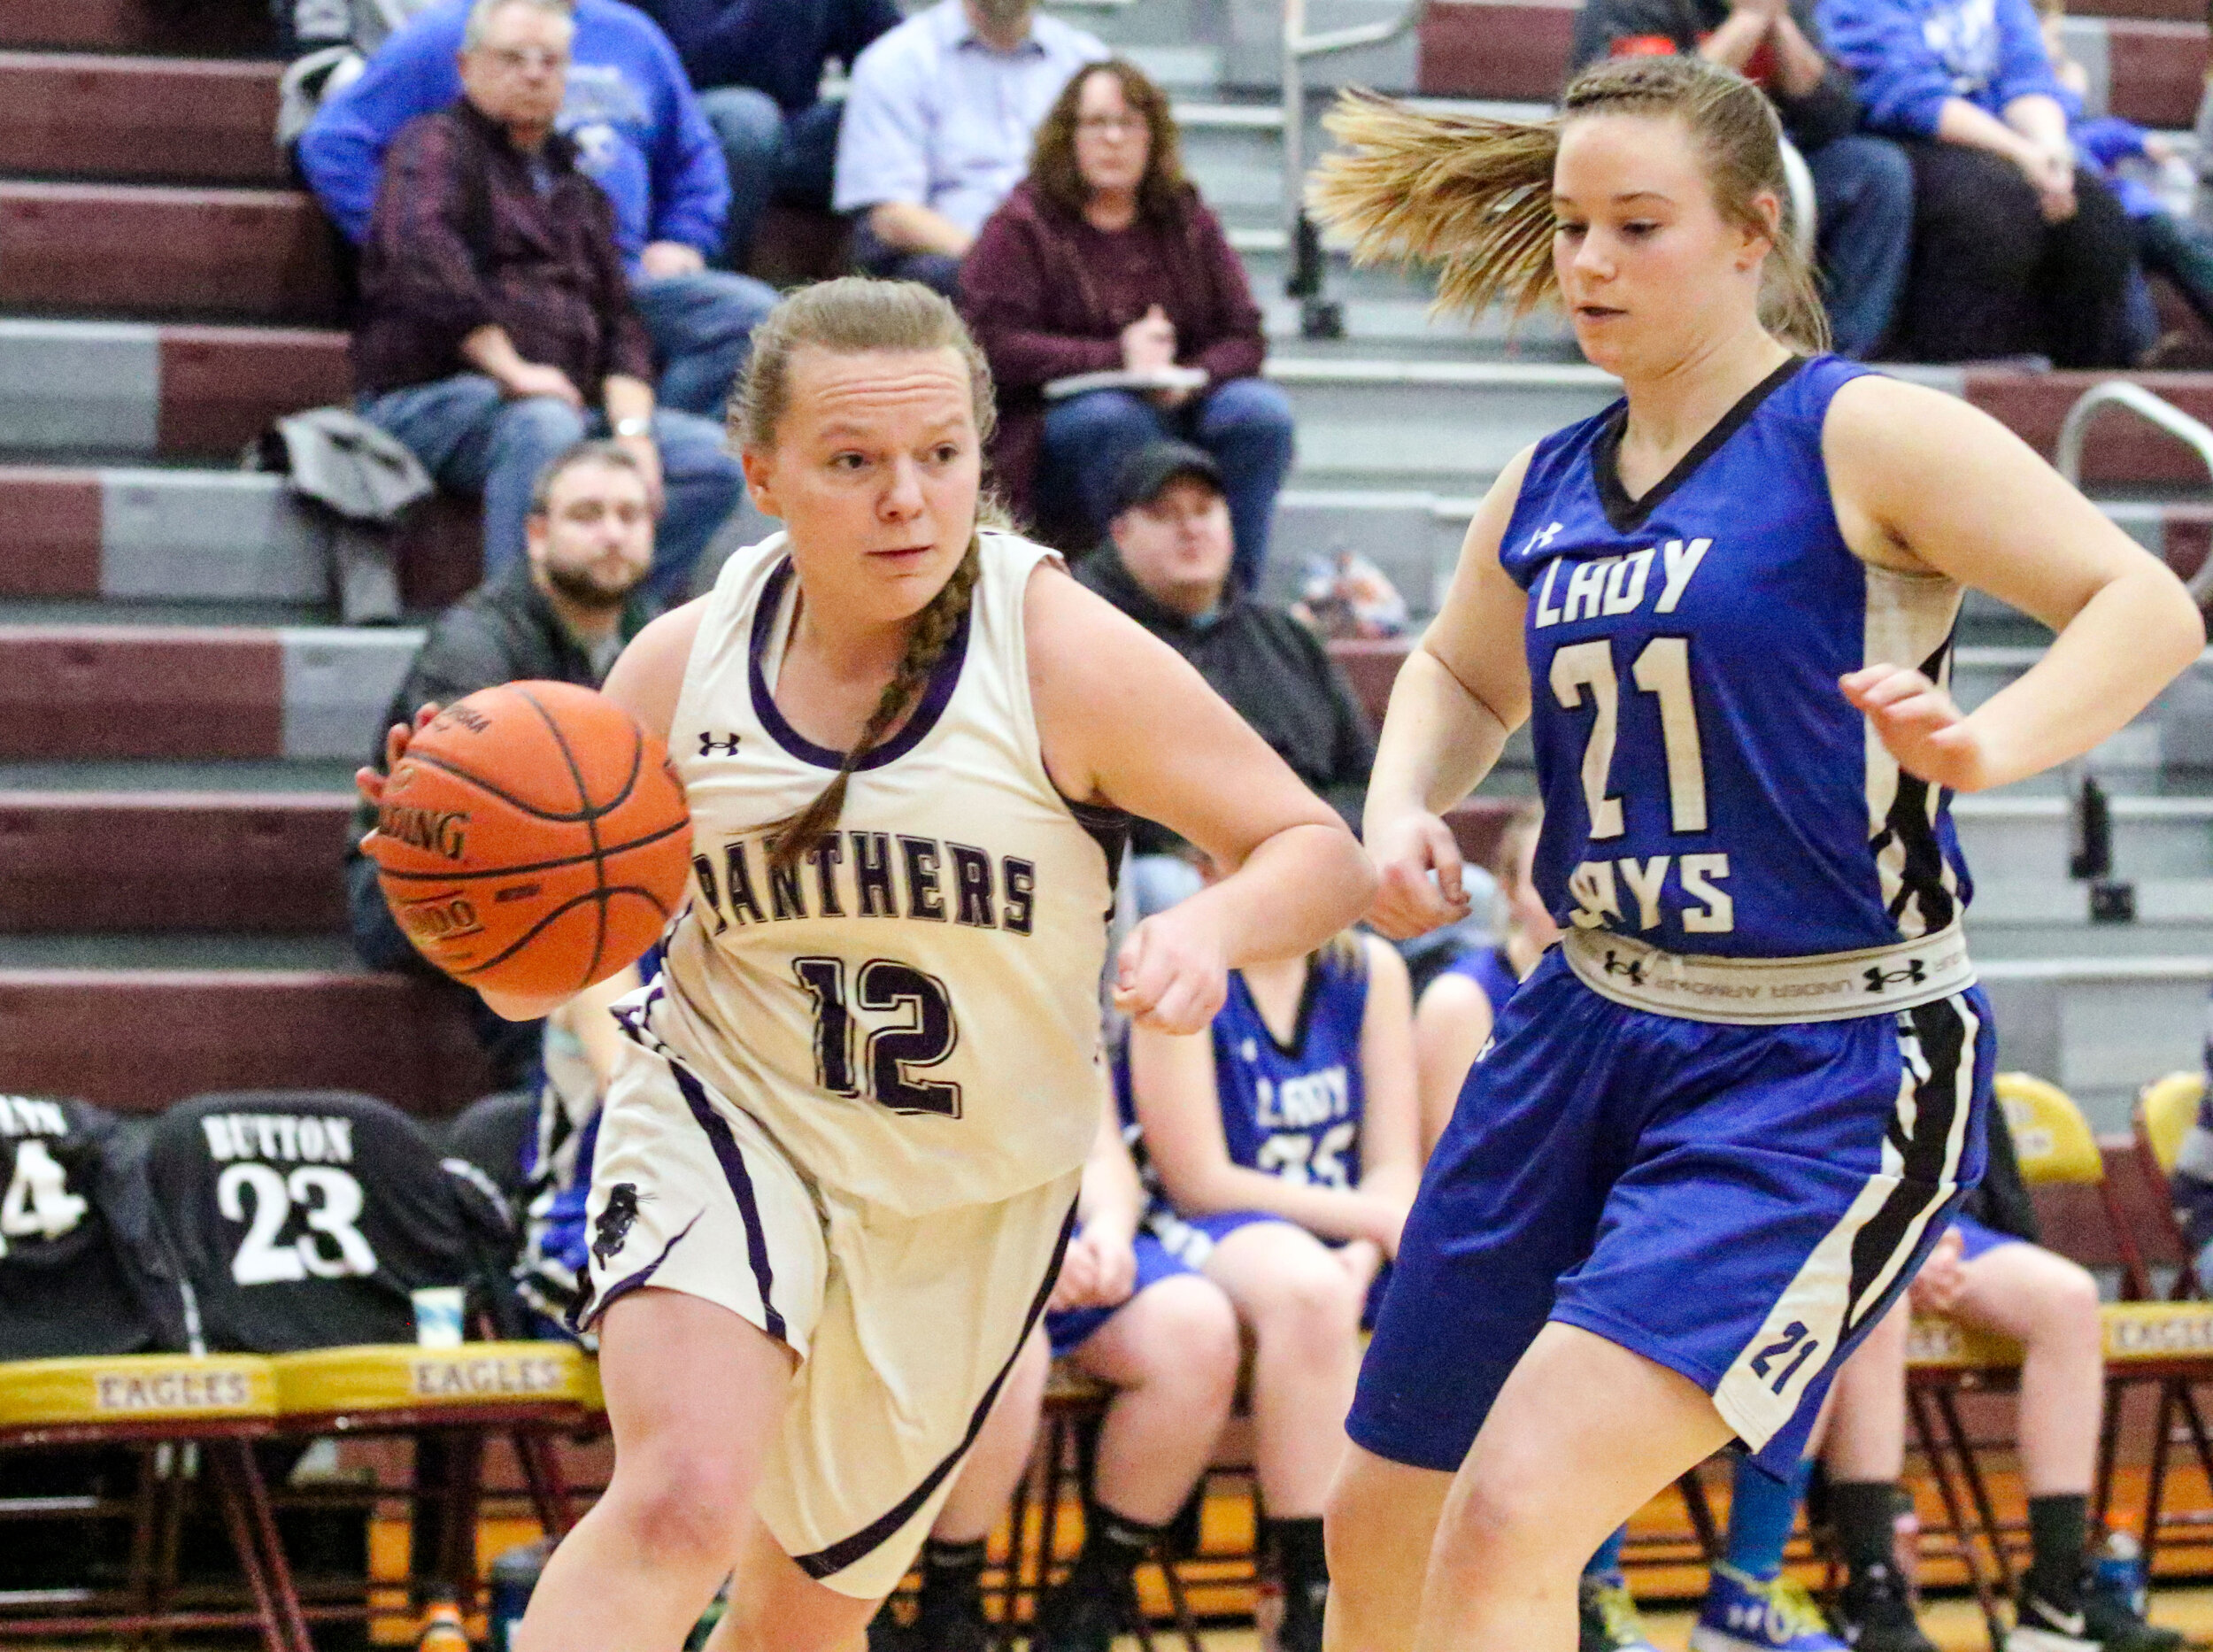  Andover senior Katie Calladine (12) drives the baseline toward the basket against the defense of Whitesville junior Kate Pensyl (21) during Monday night’s Class D2 Semifinal contest at Wayland-Cohocton. [Chris Brooks/WellsvilleSports.com] 